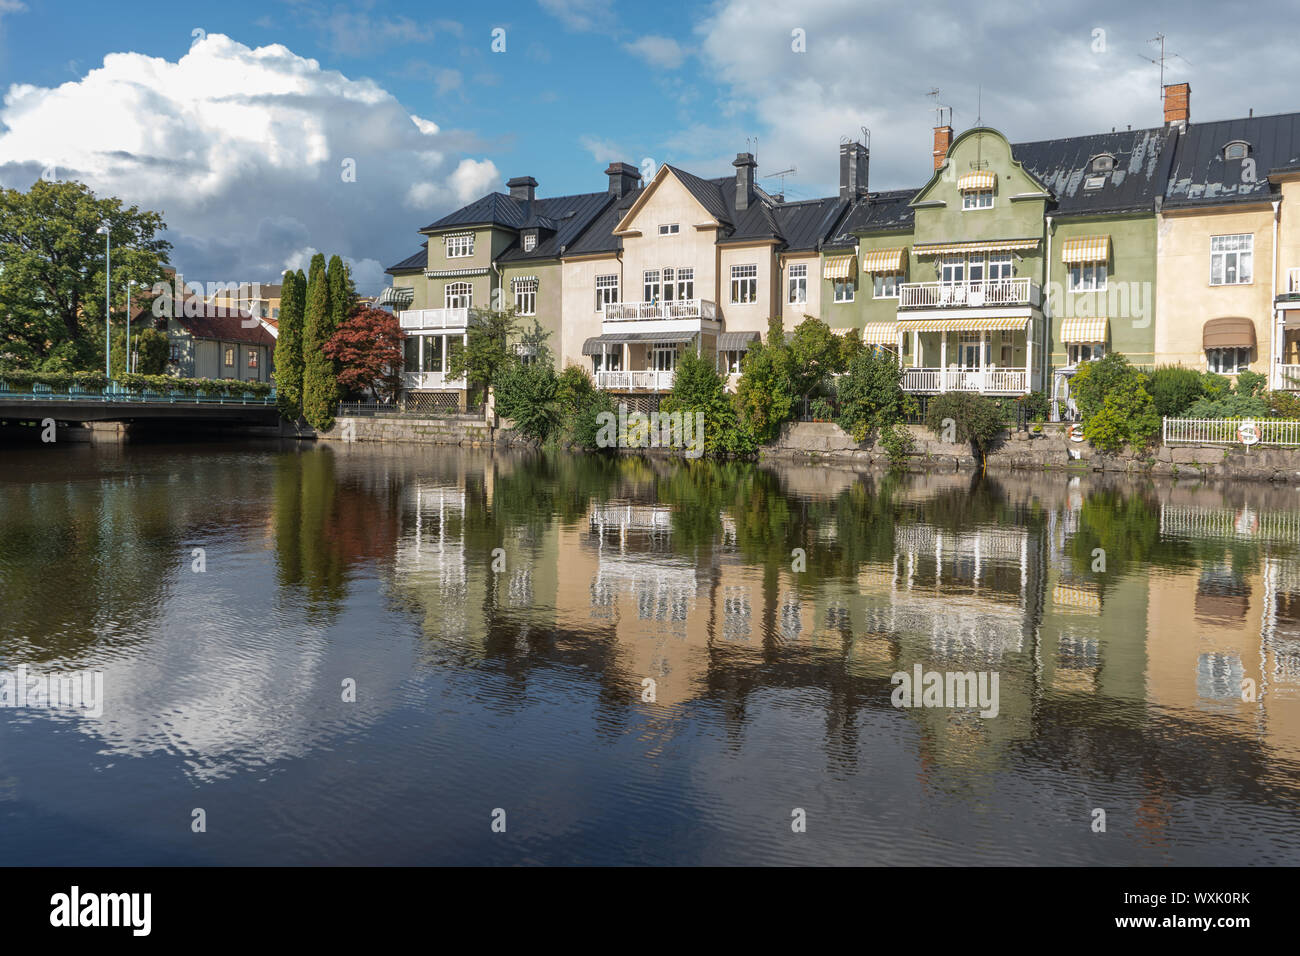 Houses by the river. Orebro city center. Travel photo, background image or illustration. Stock Photo